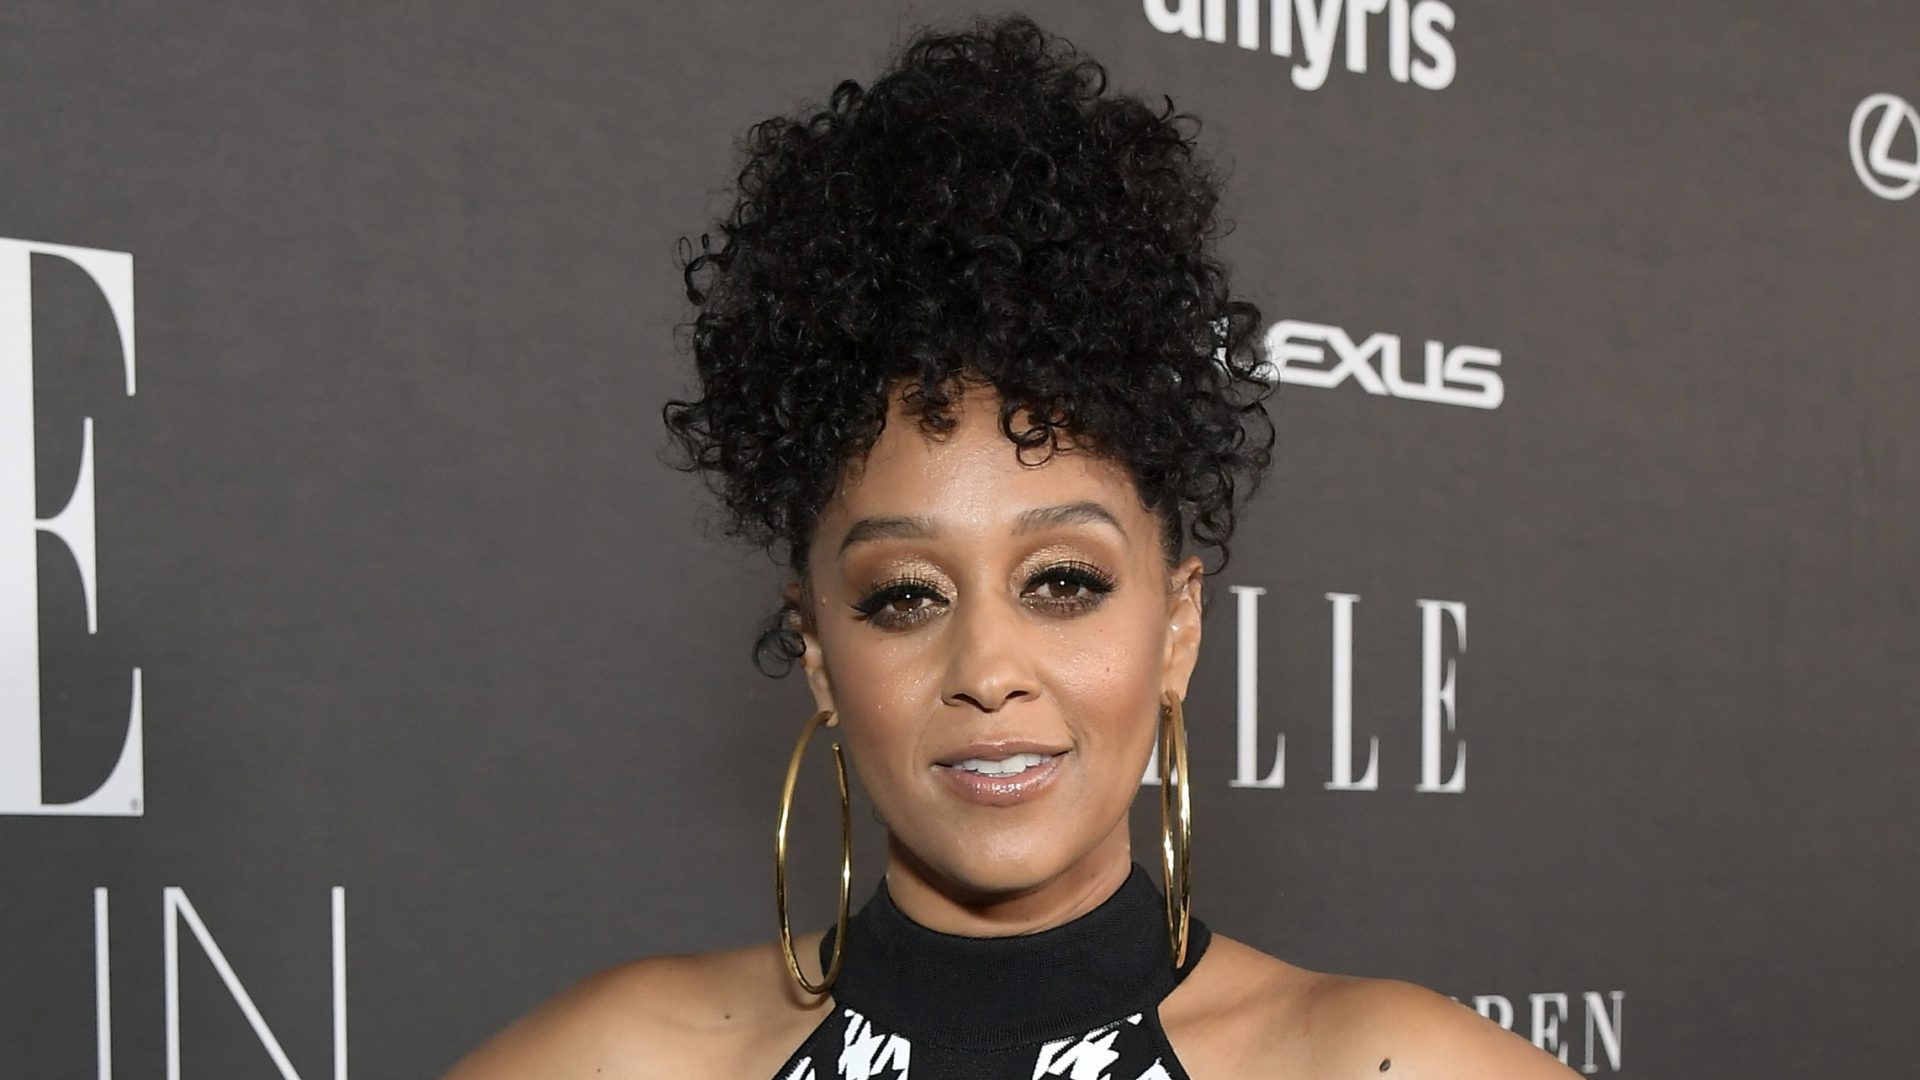 WATCH: Tia Mowry Shares Words Of Encouragement To Women Struggling To Leave A ‘Toxic’ Relationship thumbnail